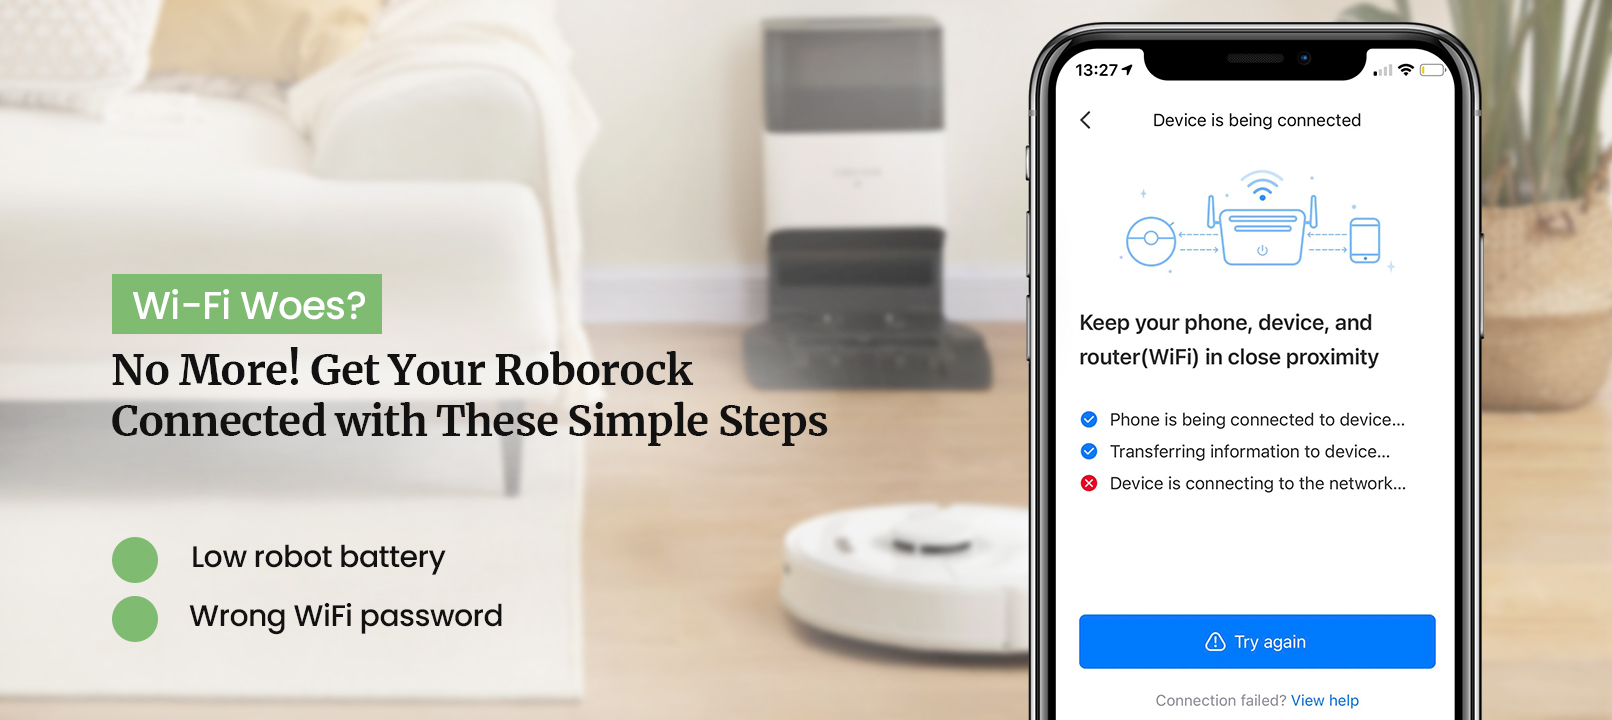 How to Fix the Roborock Not Connecting to WiFi